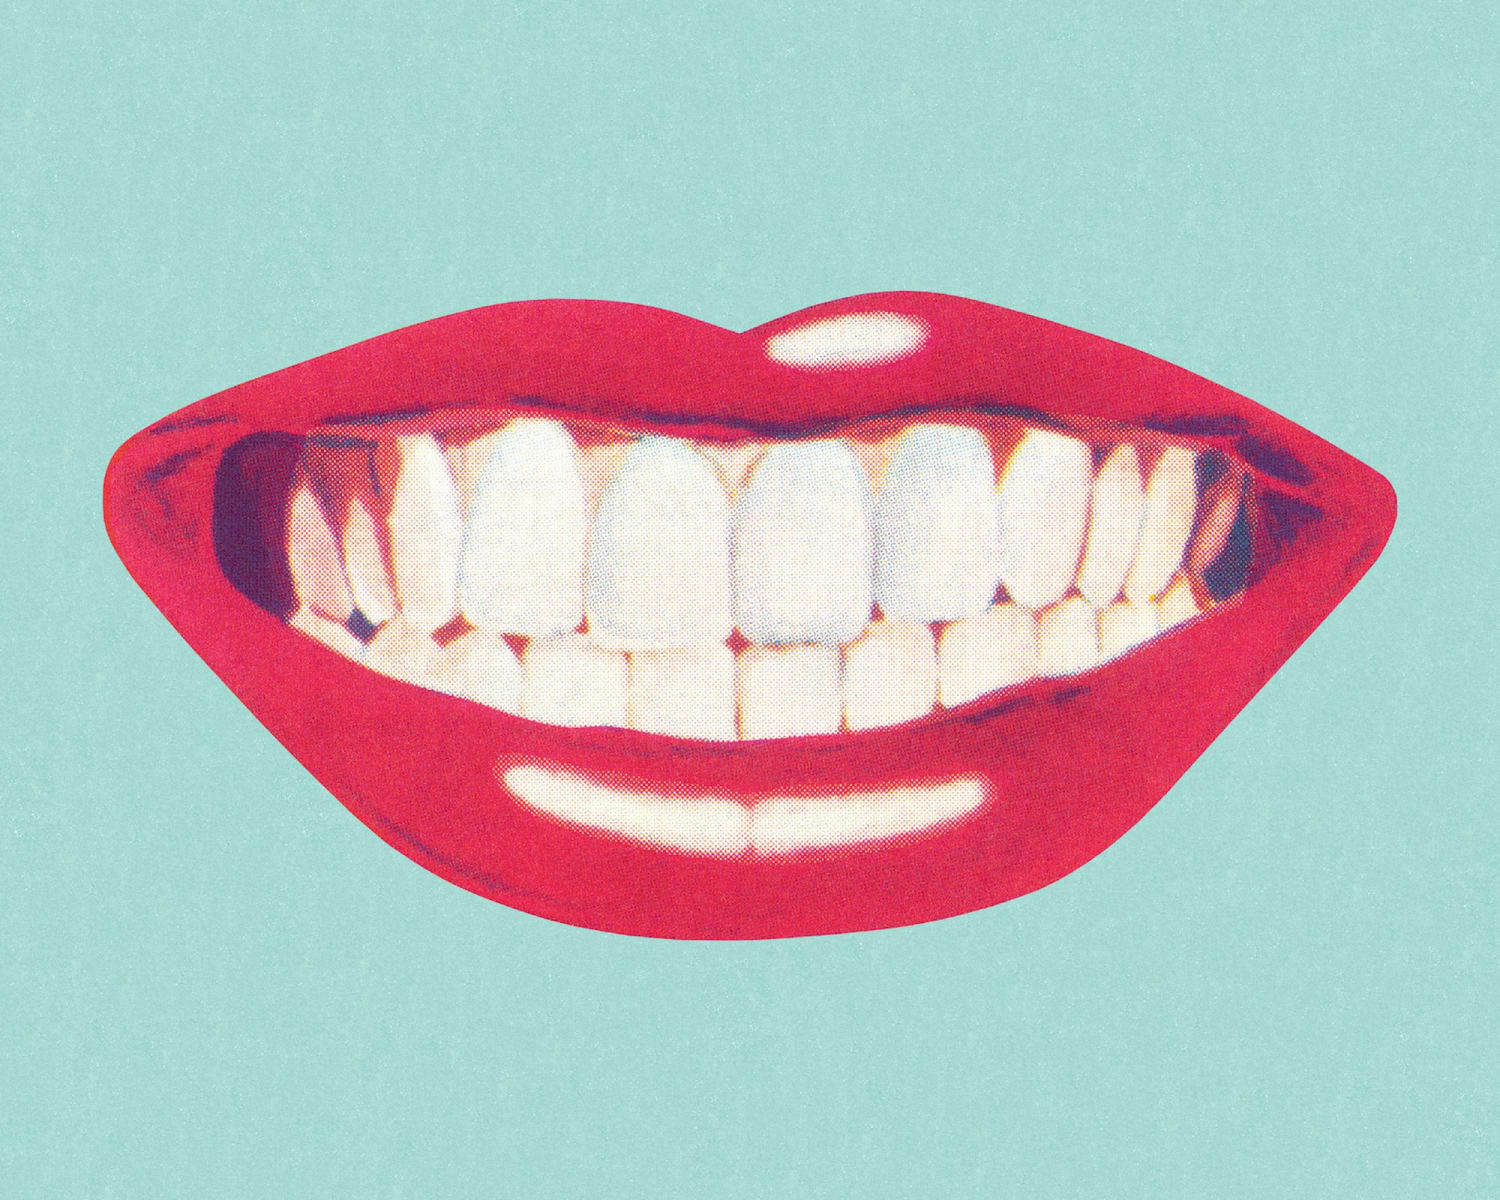 Why Americans Smile So Much - The Atlantic - Pocket